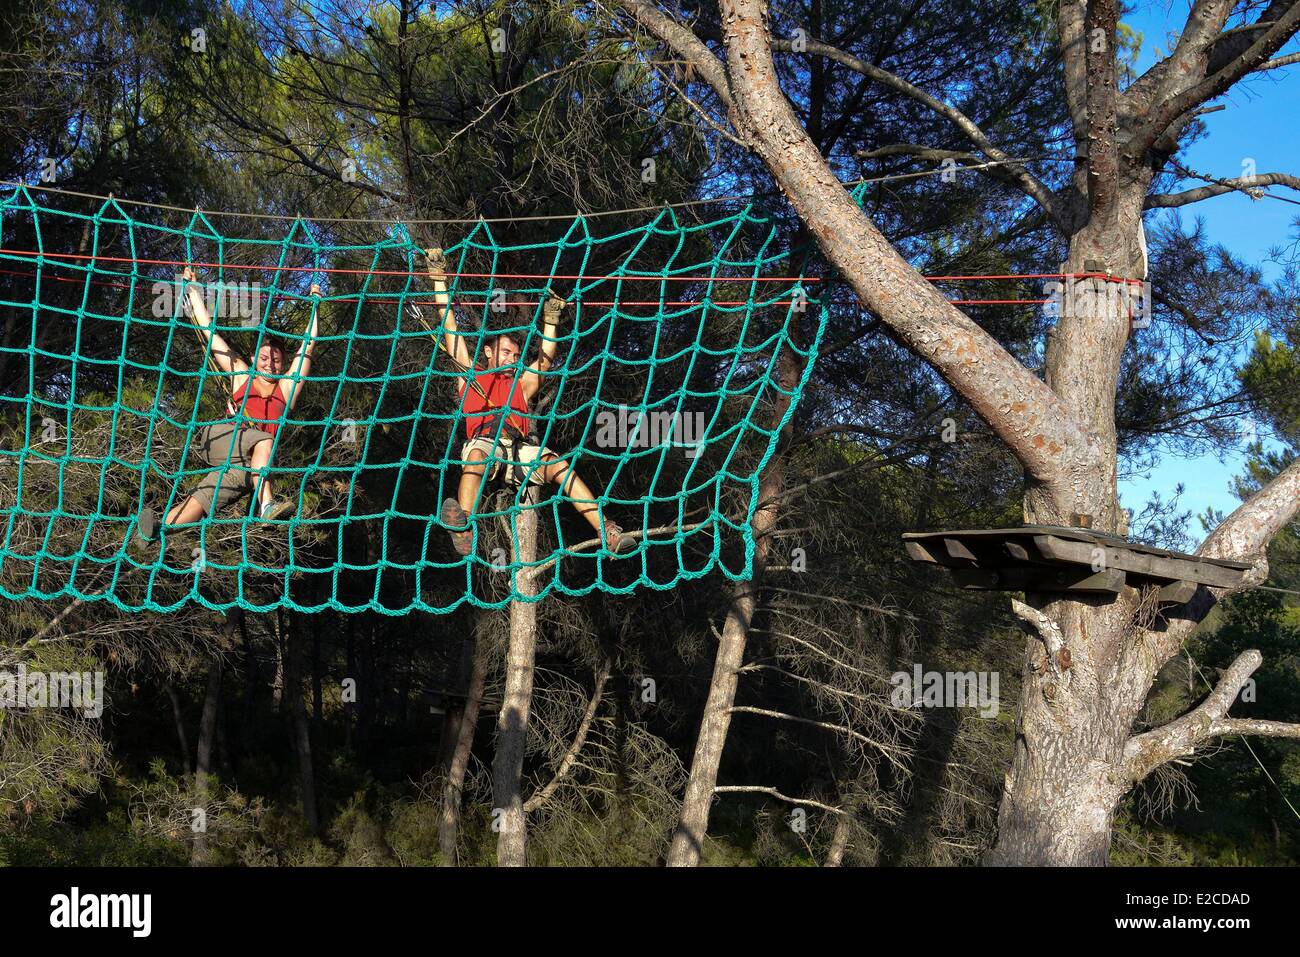 France, Herault, Beziers, Wood of Bourbaki, park of adventure in forest consisted of Tyrolean and of climbing walls, couple suspended from a net in rope above the space Stock Photo